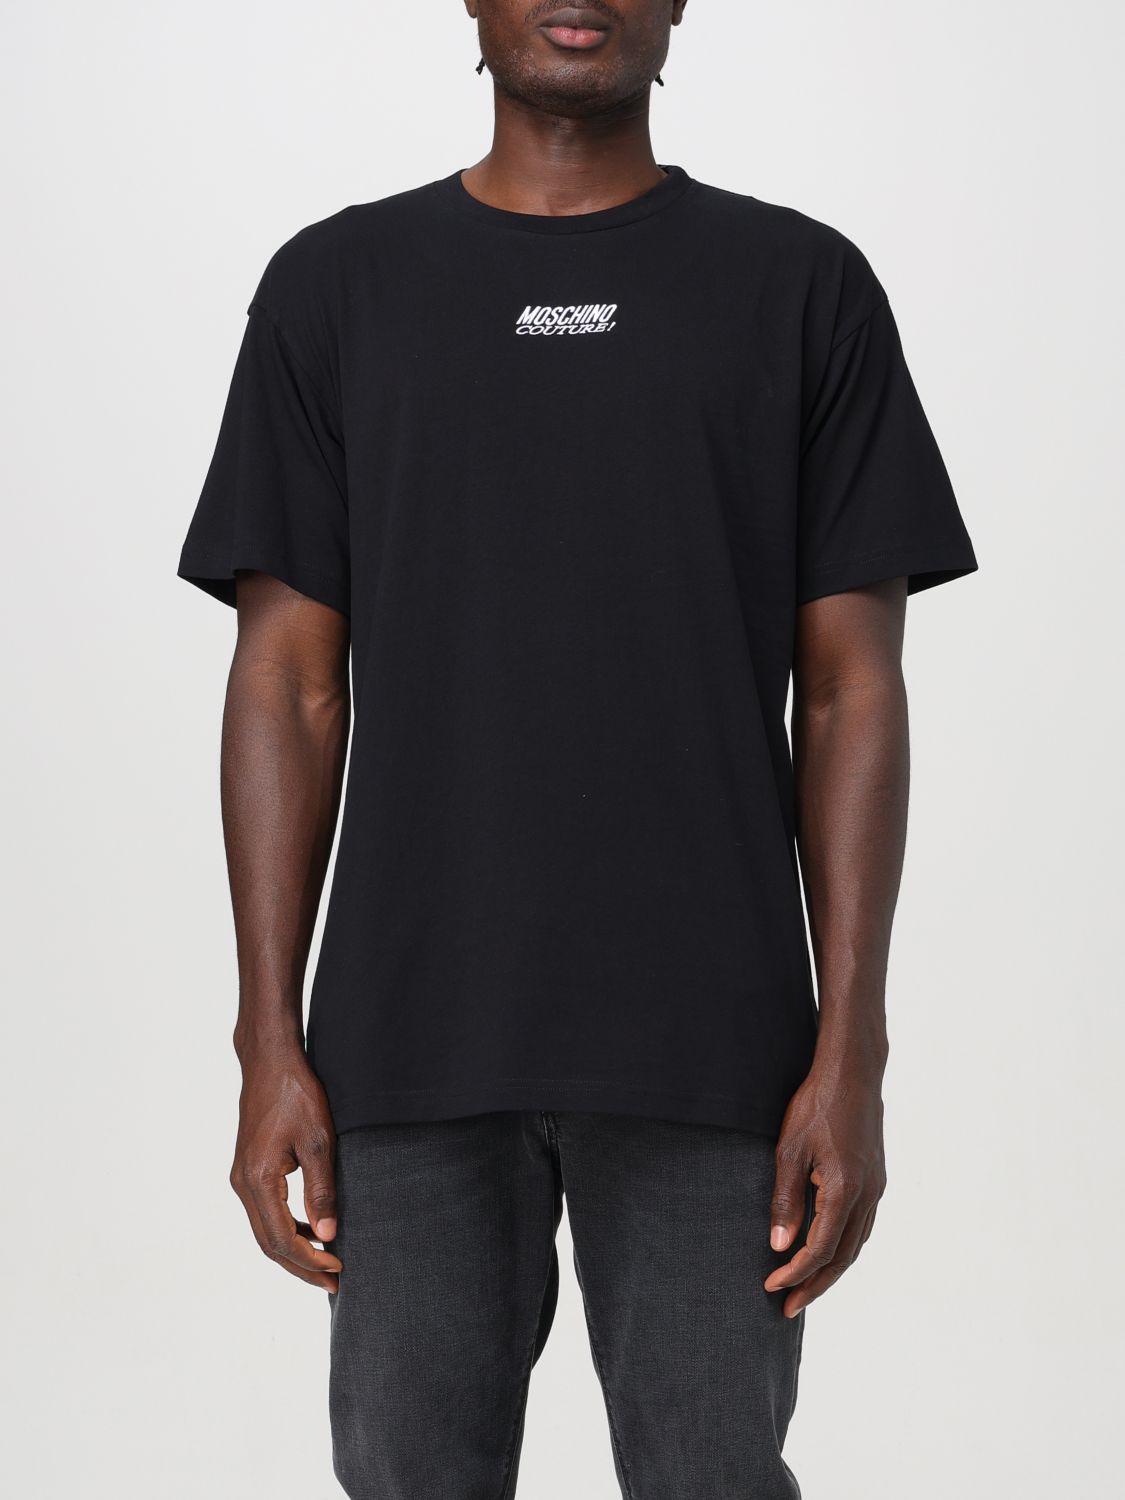 Moschino Couture T-Shirt MOSCHINO COUTURE Men color Black